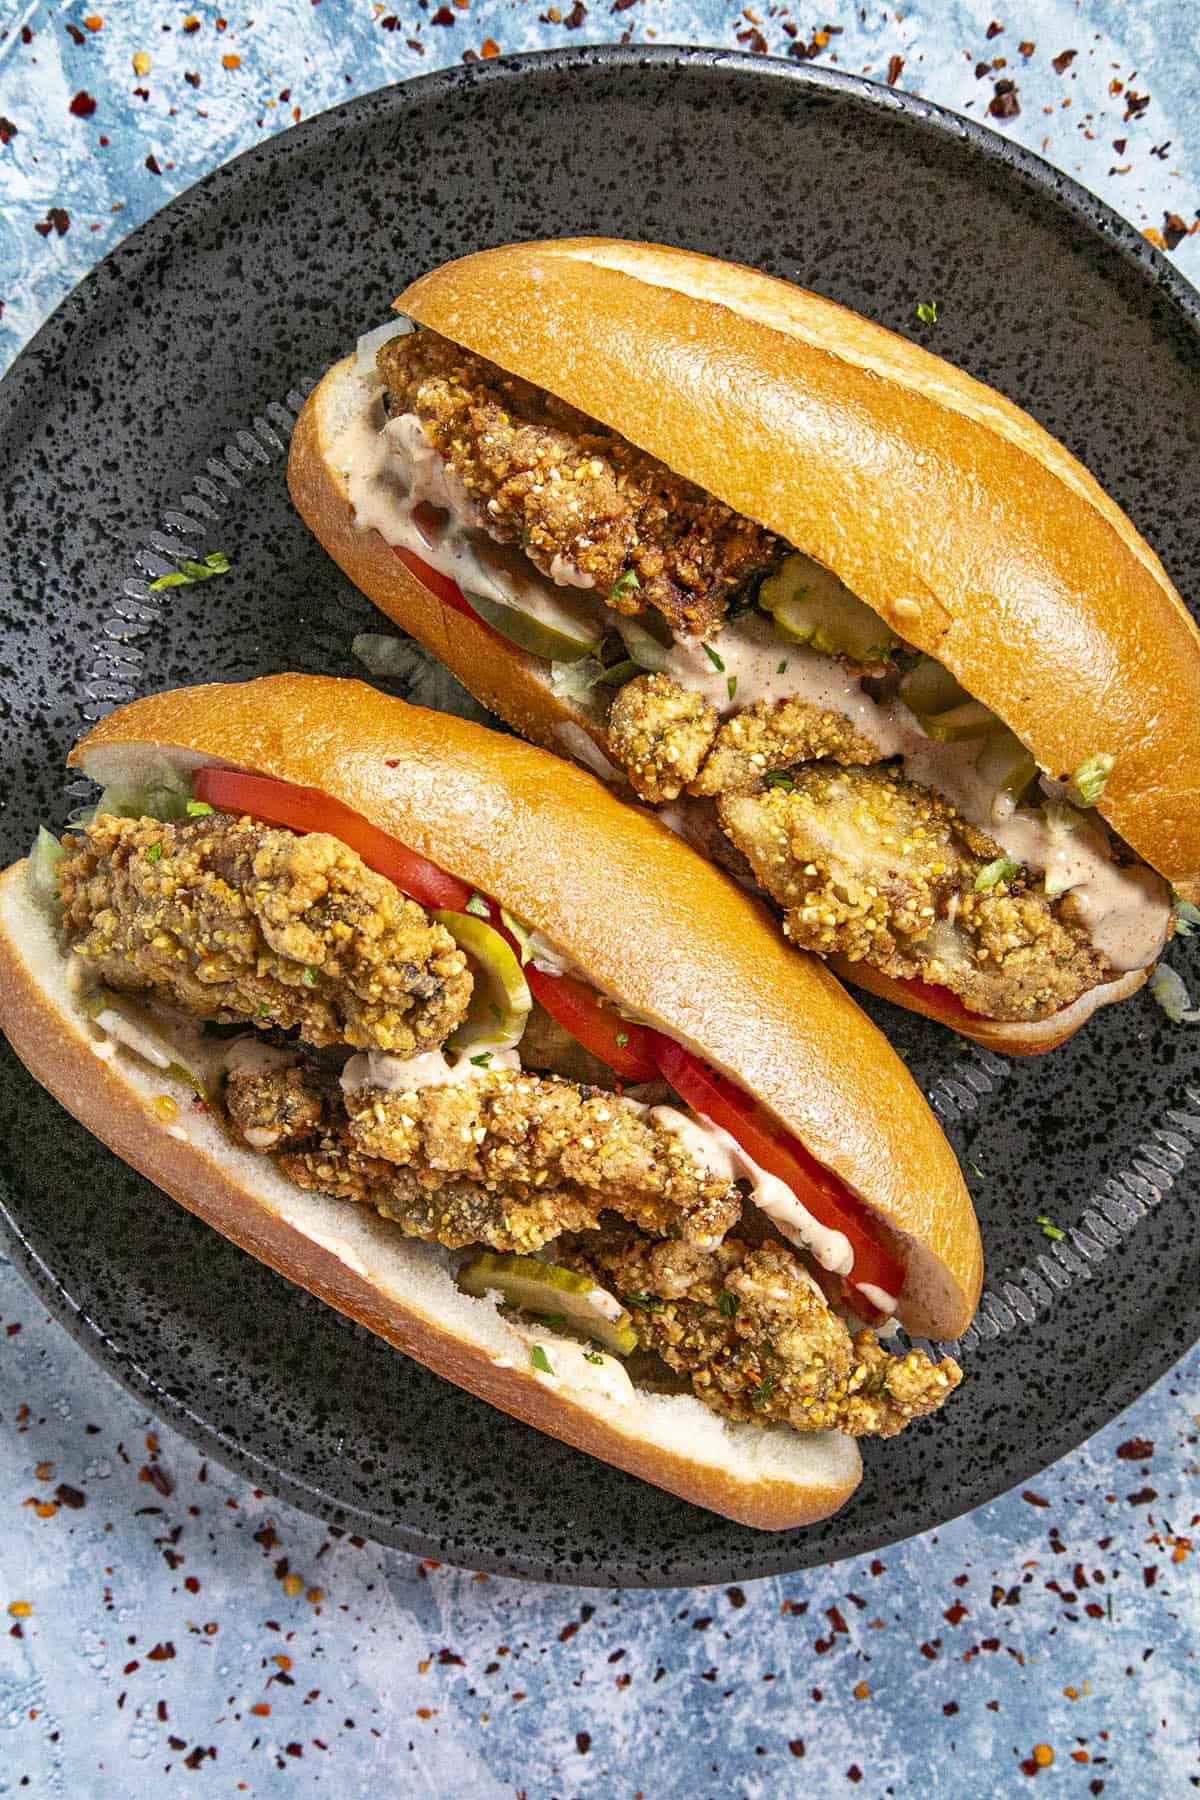 Oyster Po Boy Sandwiches with pickles, tomatoes, and remoulade sauce